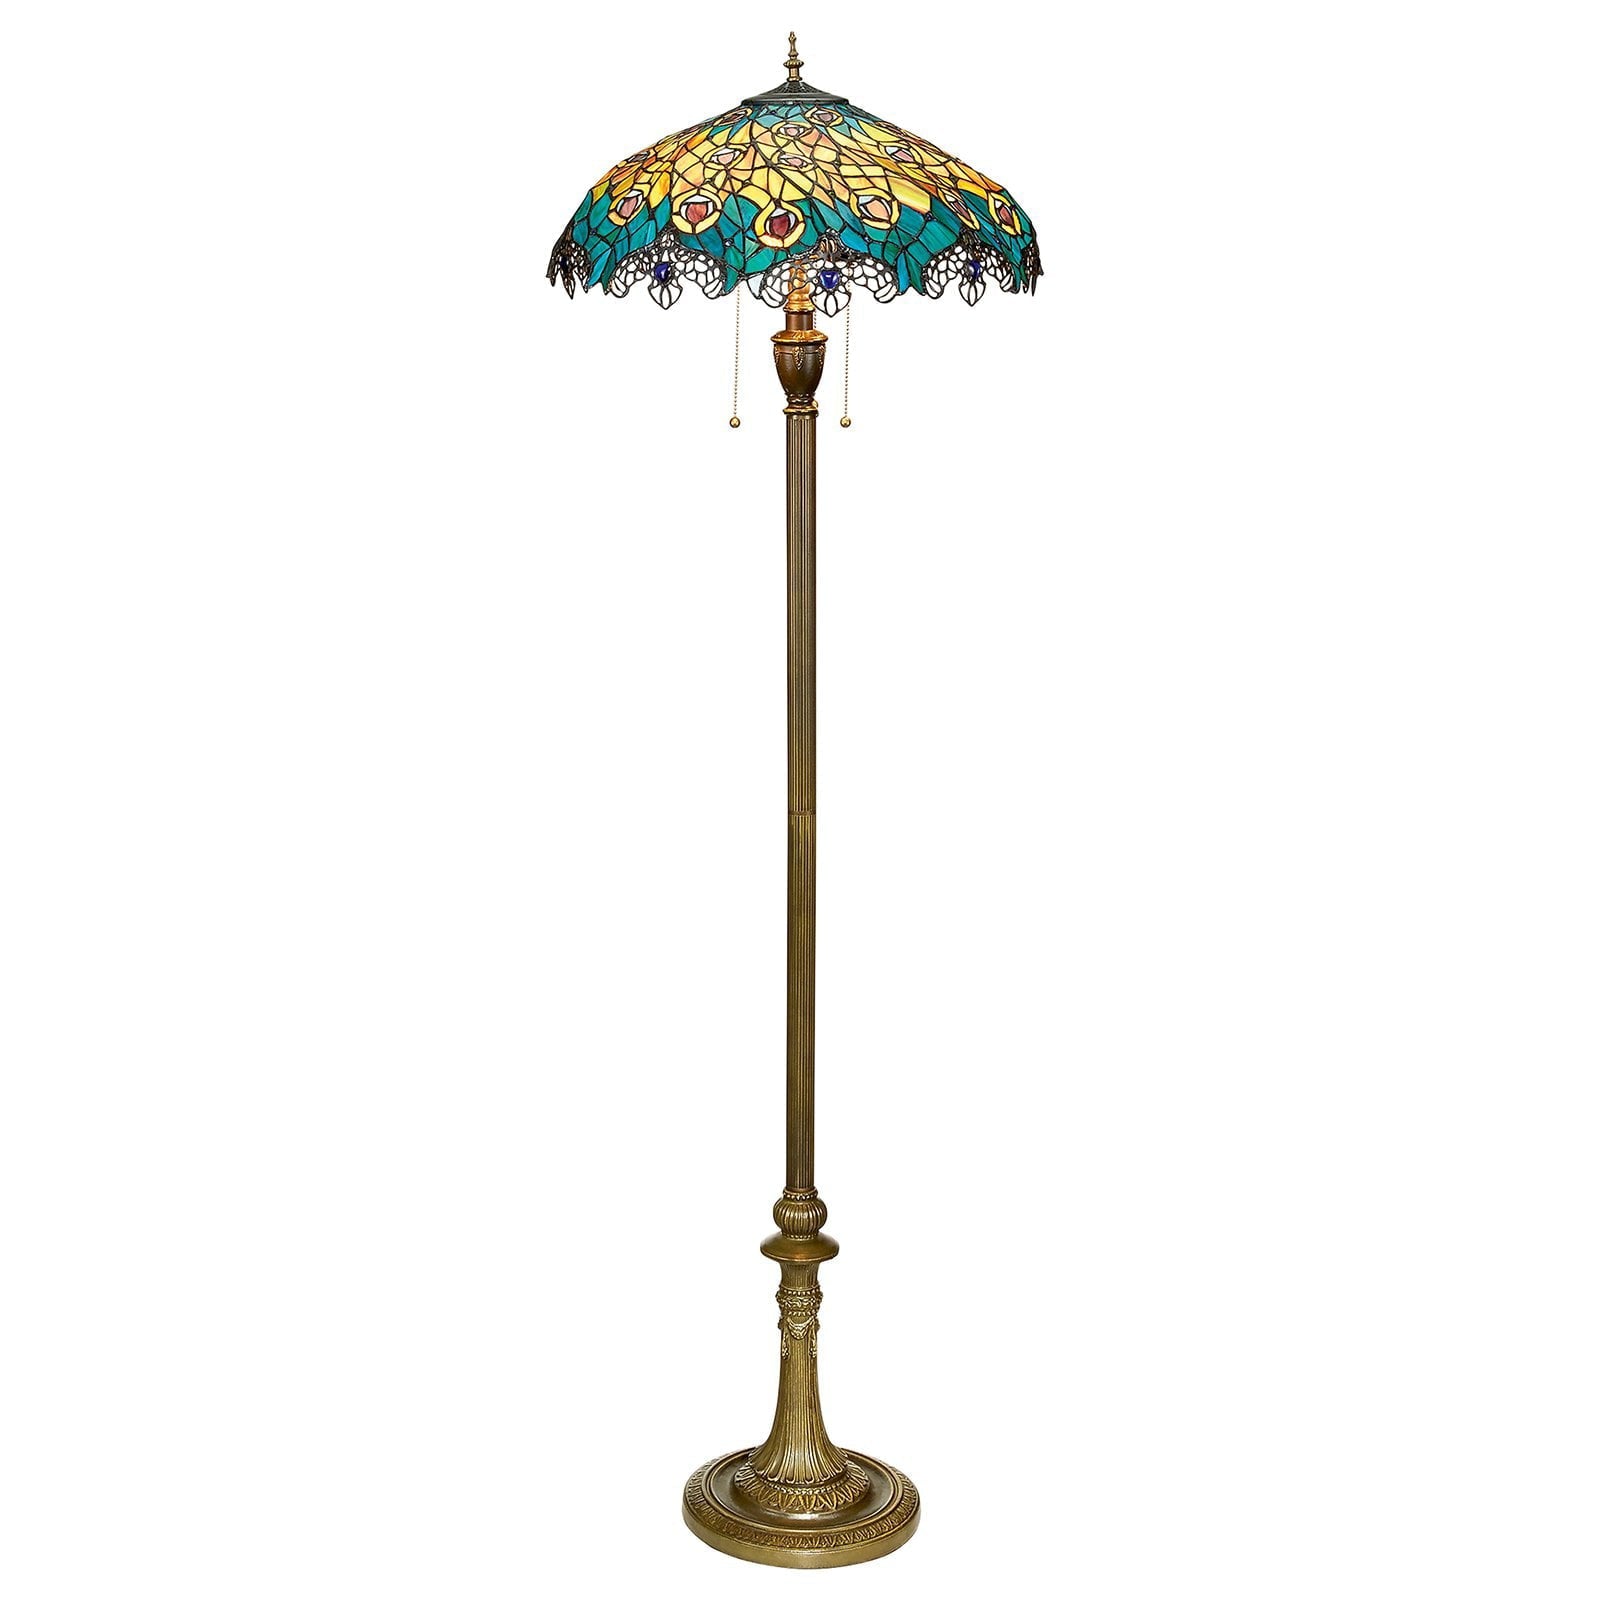 Design Toscano  Art Nouveau Peacock  Style Stained Glass Floor Lamp